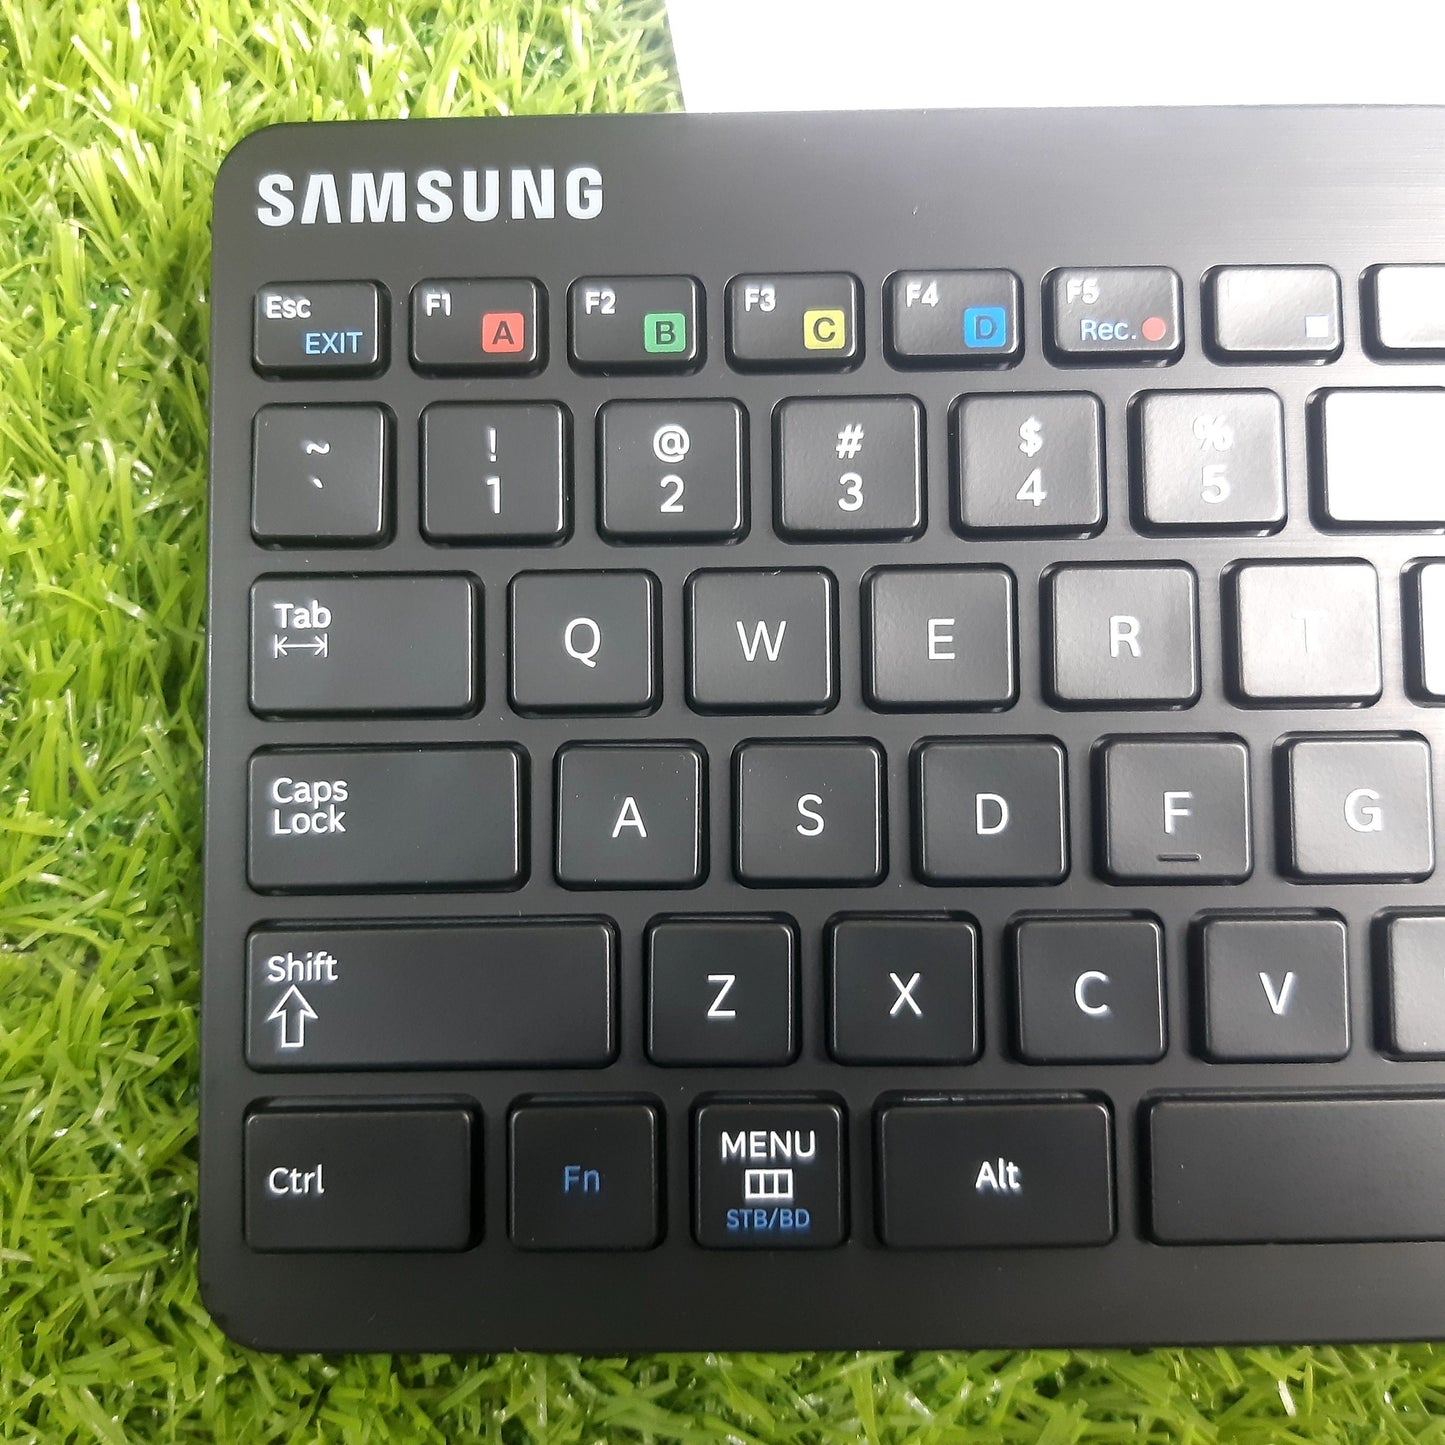 Samsung Smart Keyboard and Mouse Pad